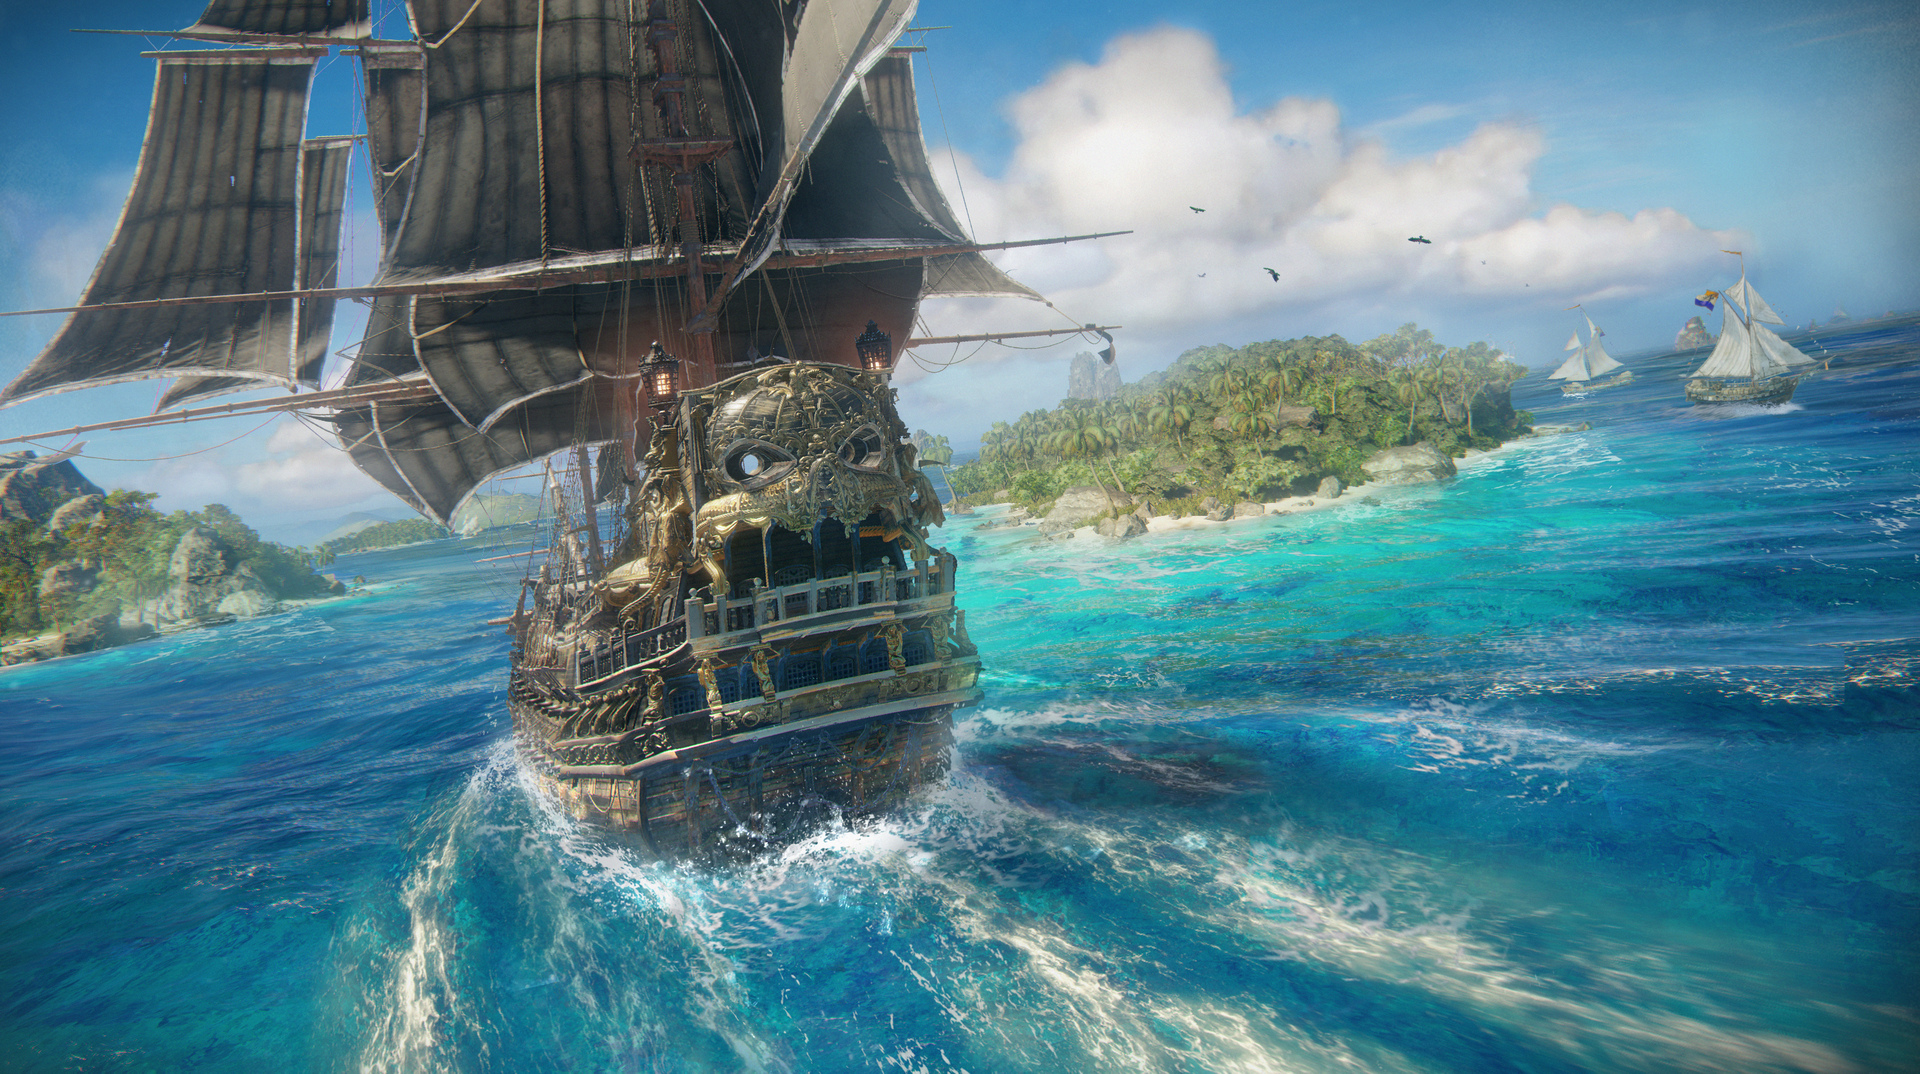 Here is your first look at Ubisoft's Skull and Bones